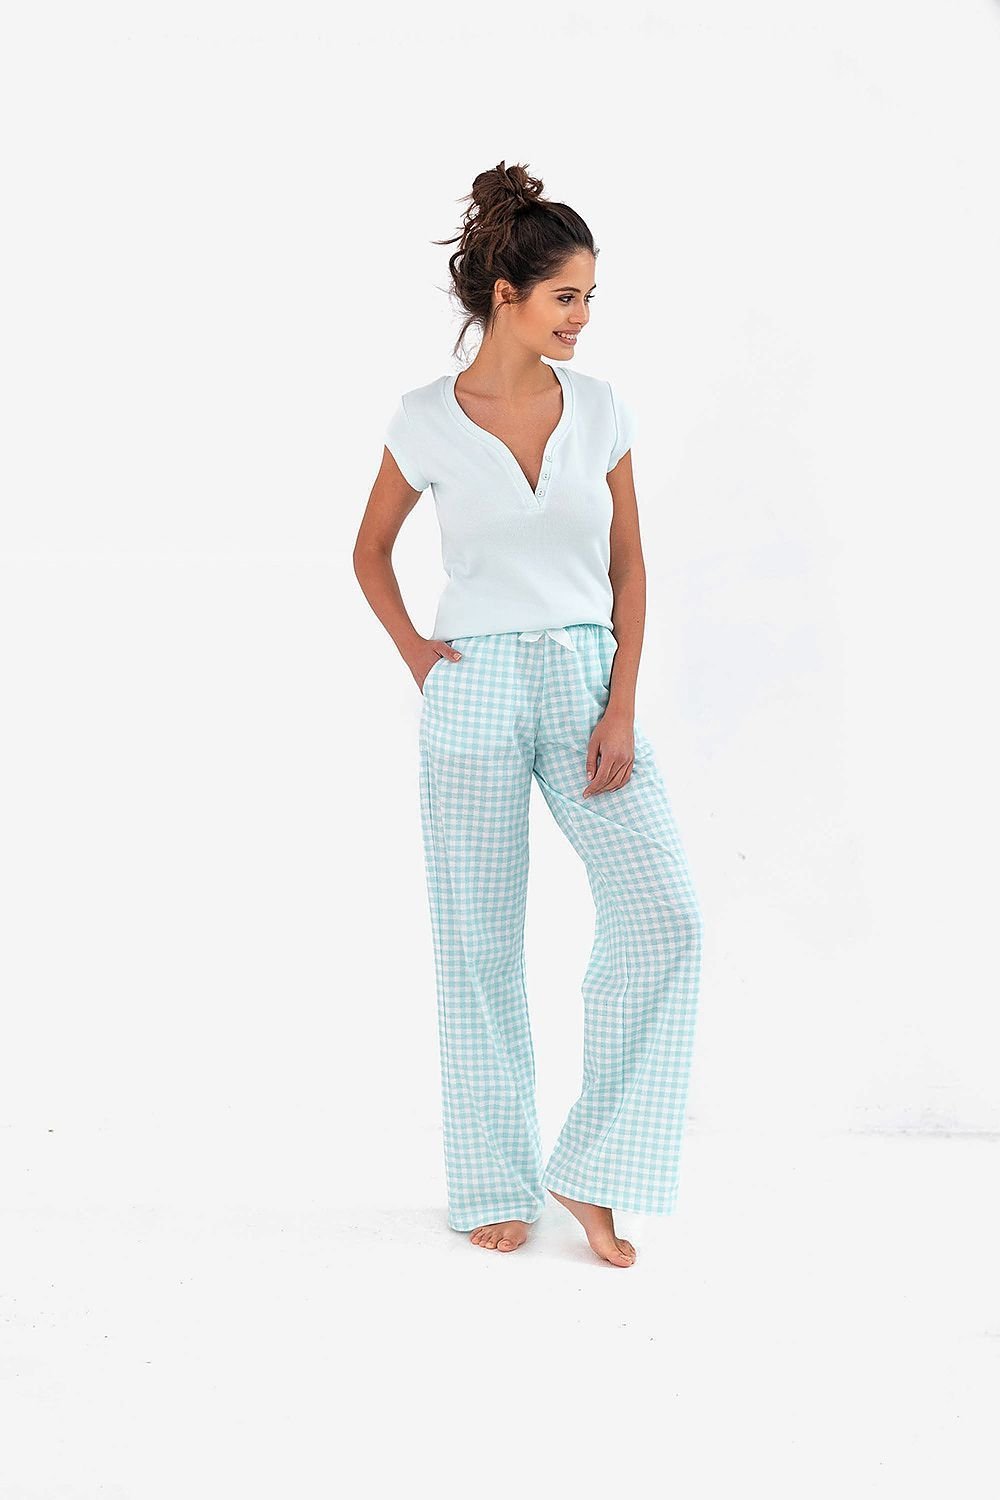 Pyjama - M&H FashionPyjamaM&H FashionM&H Fashion179540_10583415902921433514LPyjama SensisM&H FashionM&H FashionWomen's pajamas made of high quality fine cotton. T-shirt with short sleeves. For the set long pants. The set perfectly enhances the shapes. Pants finished with a wePyjama